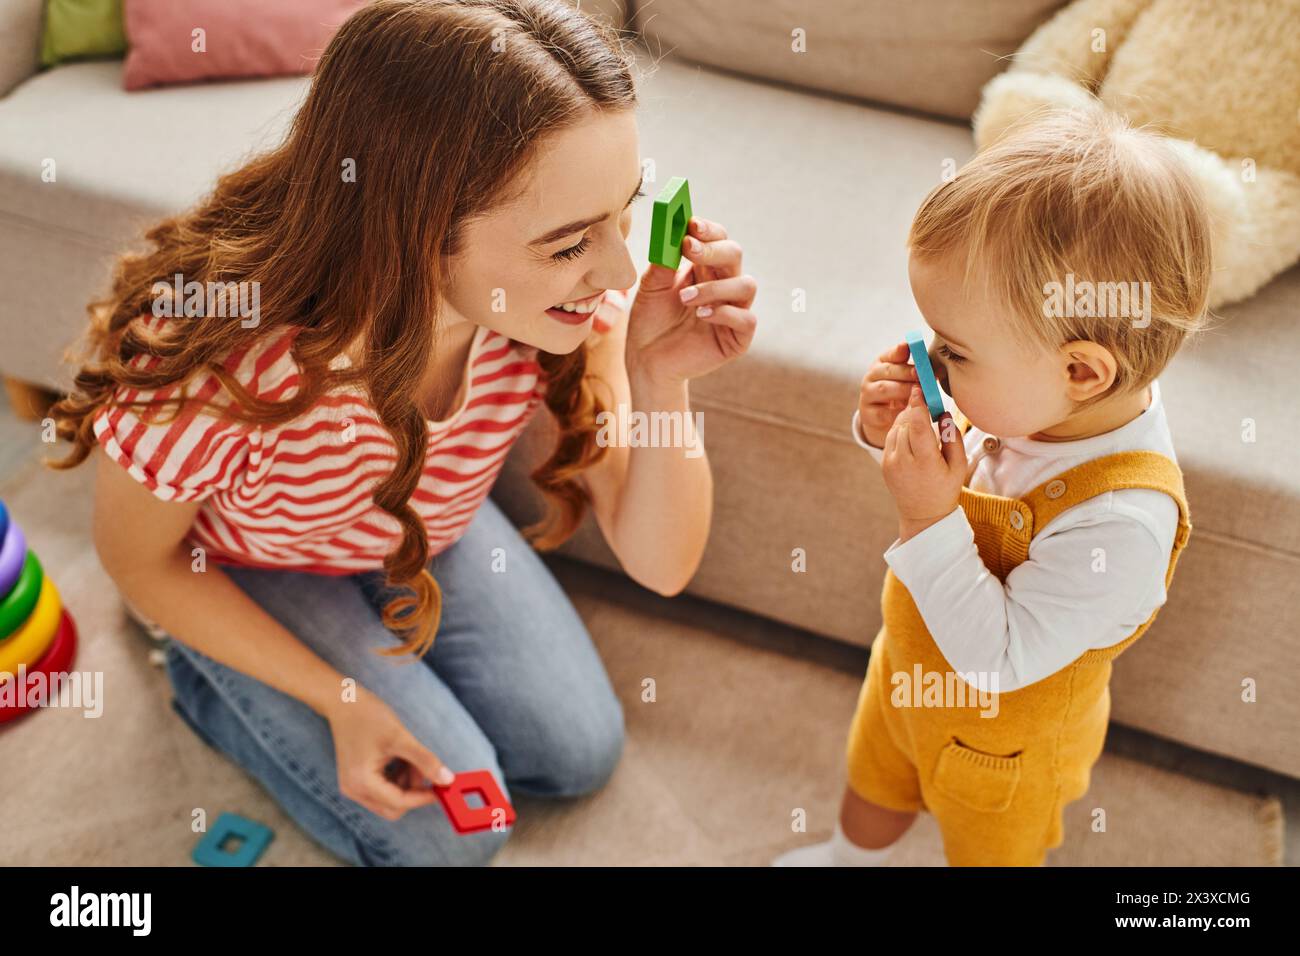 A young mother happily engages with her toddler daughter on the floor, creating a heartwarming moment of joyful interaction. Stock Photo